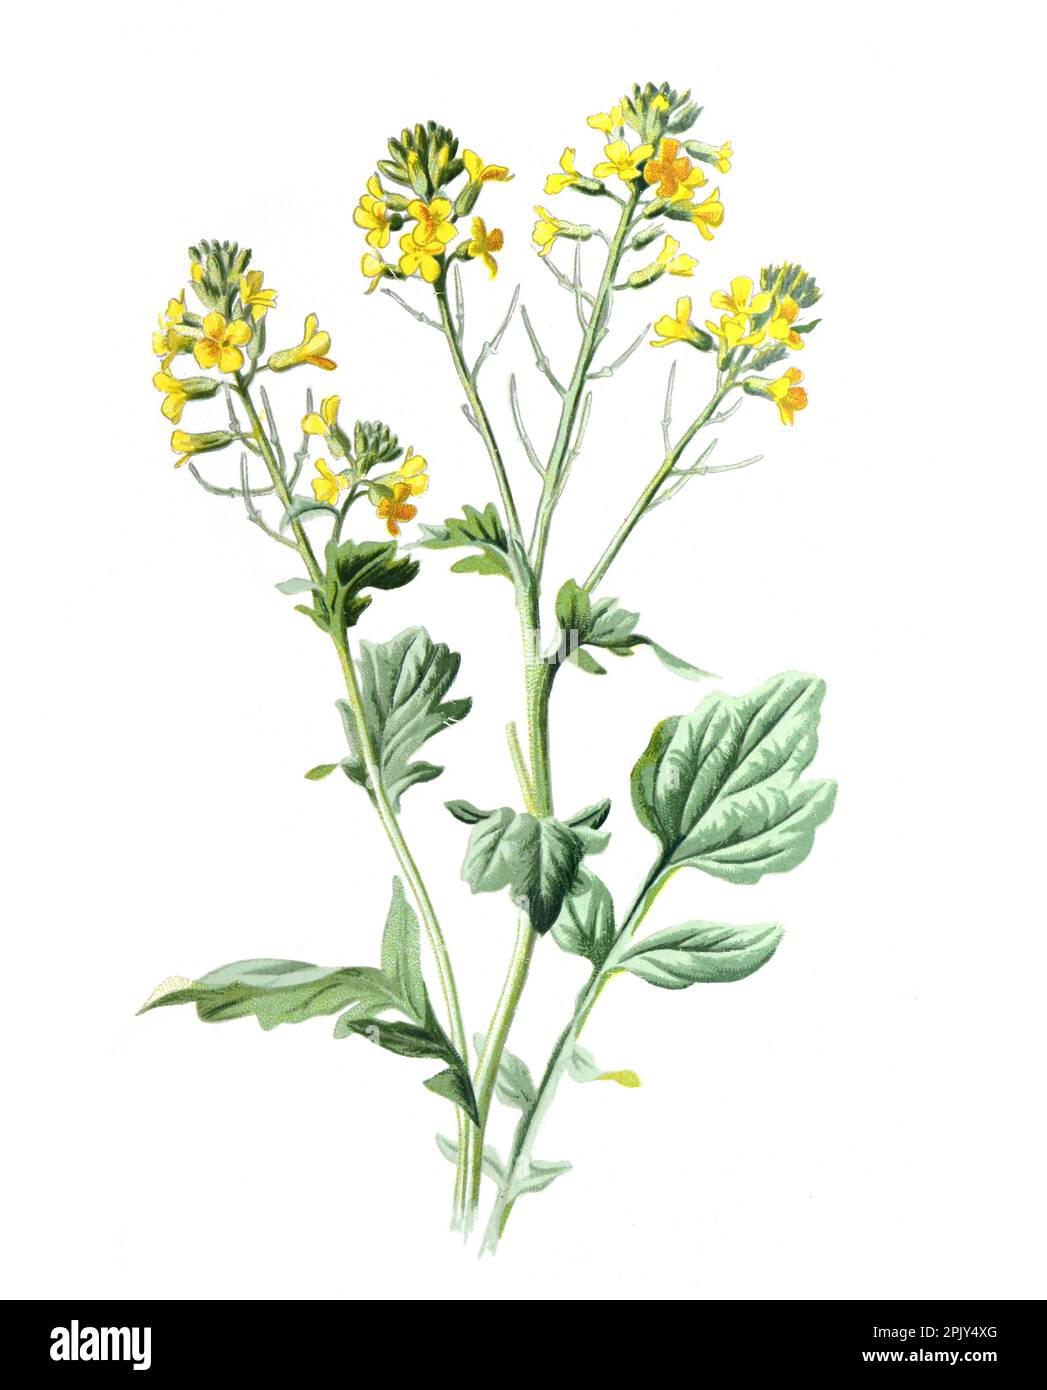 Barbarea (winter cress or yellow rocket) family Brassicaceae. Antique hand drawn field flowers illustration. Vintage wild field flower illustration. Stock Photo